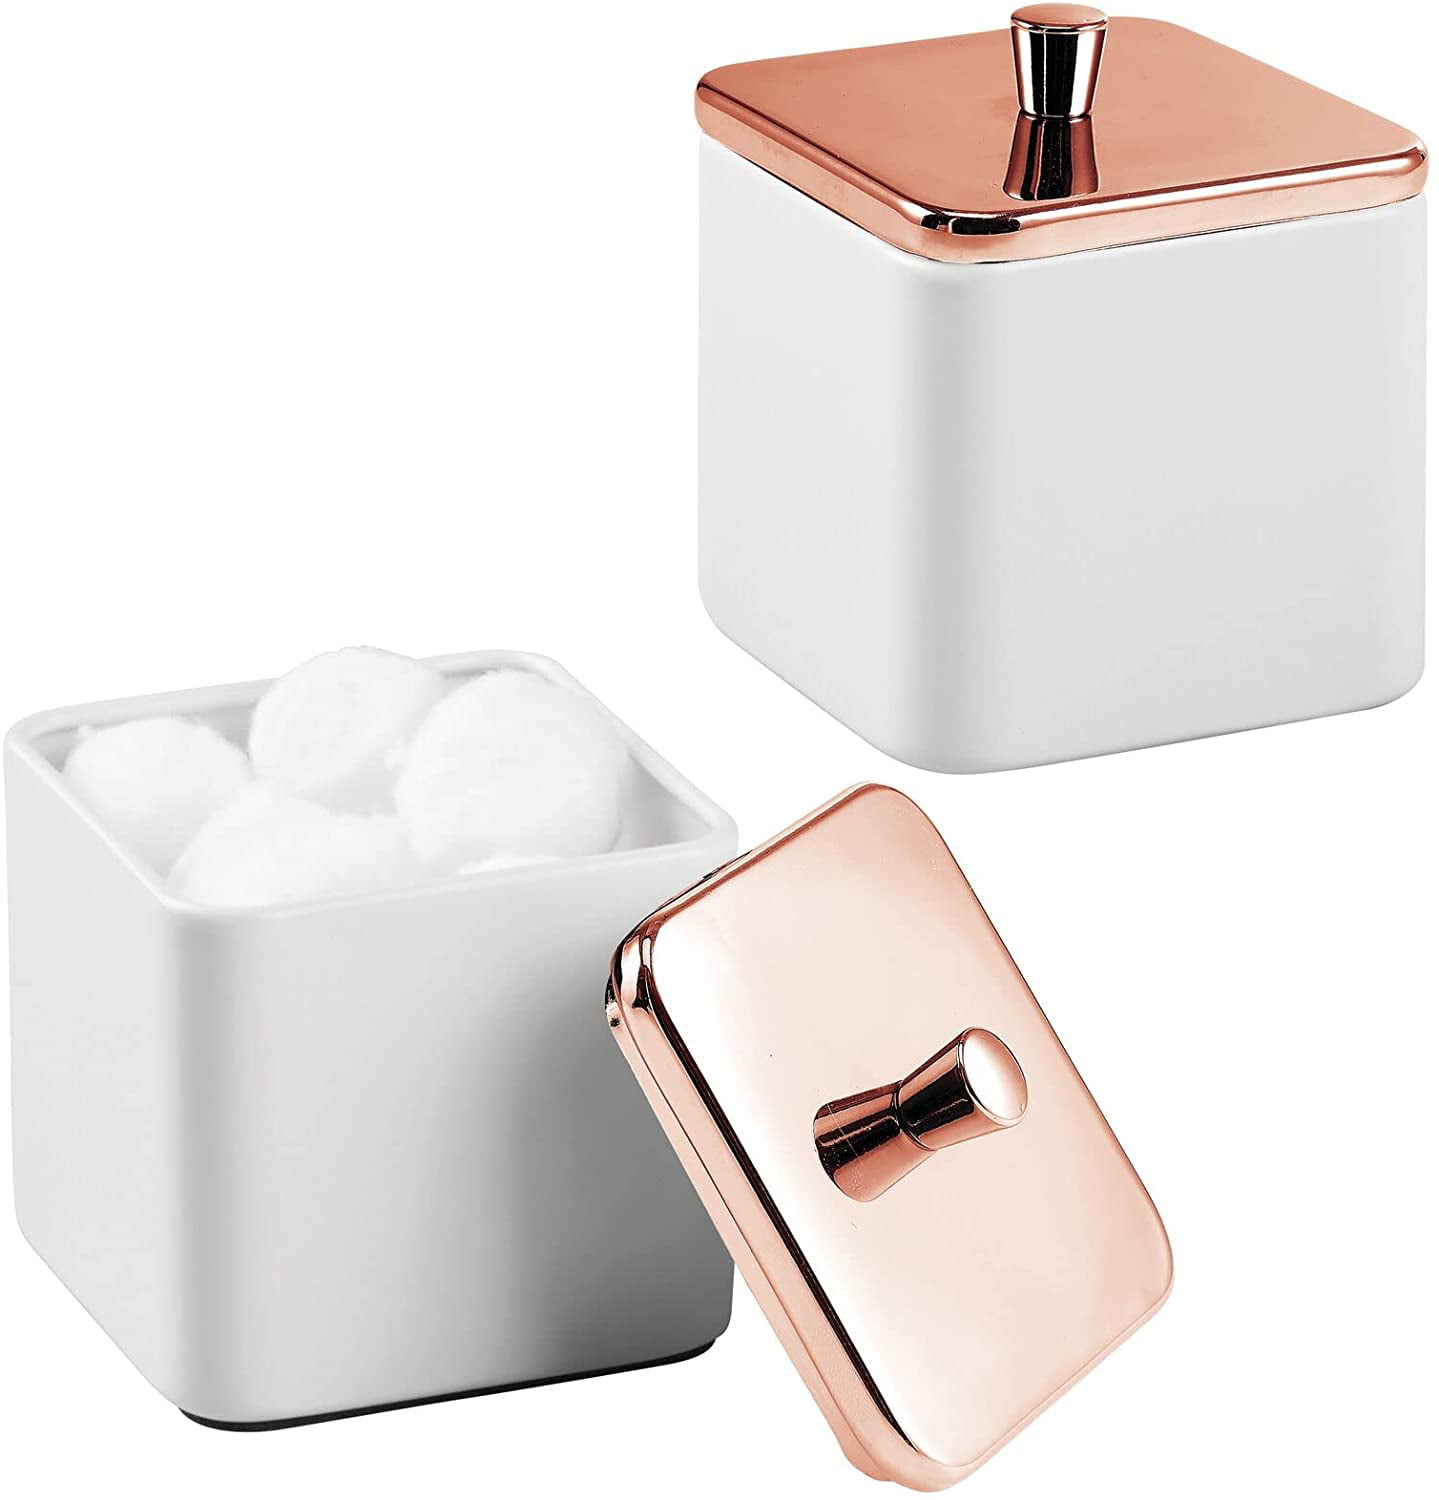 Bath Salts Makeup Sponges mDesign Square Metal Bathroom Vanity Countertop Storage Organizer Canister Apothecary Jar for Cotton Swabs Rose Gold Rounds Balls Blenders 